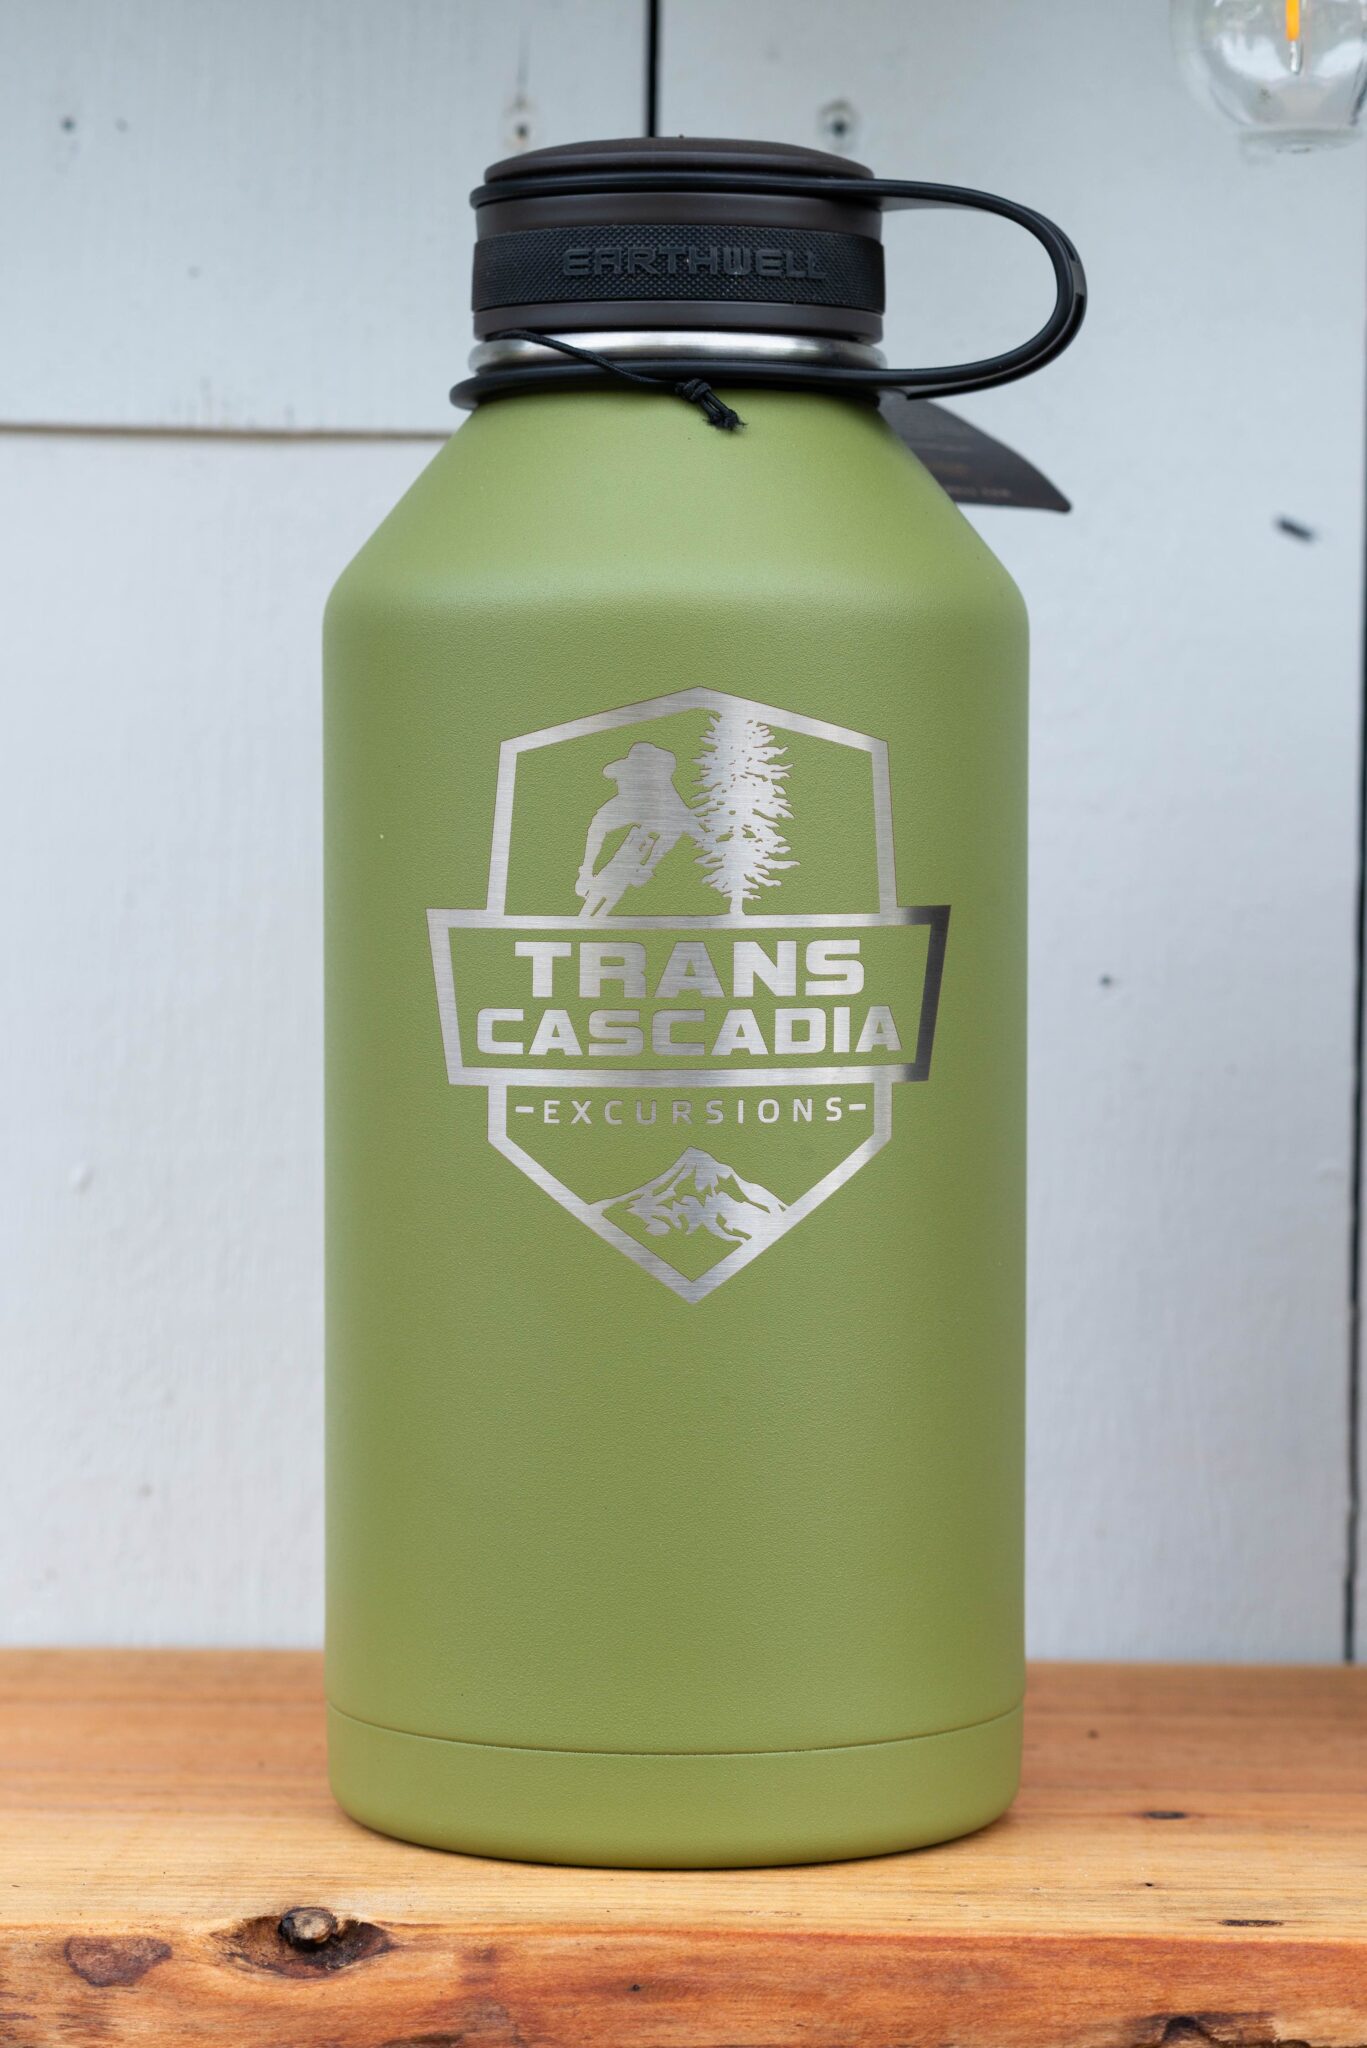 https://www.transcascadiaexcursions.com/wp-content/uploads/2021/08/TCE_Product-Water-Bottle_Large_Green-scaled.jpeg